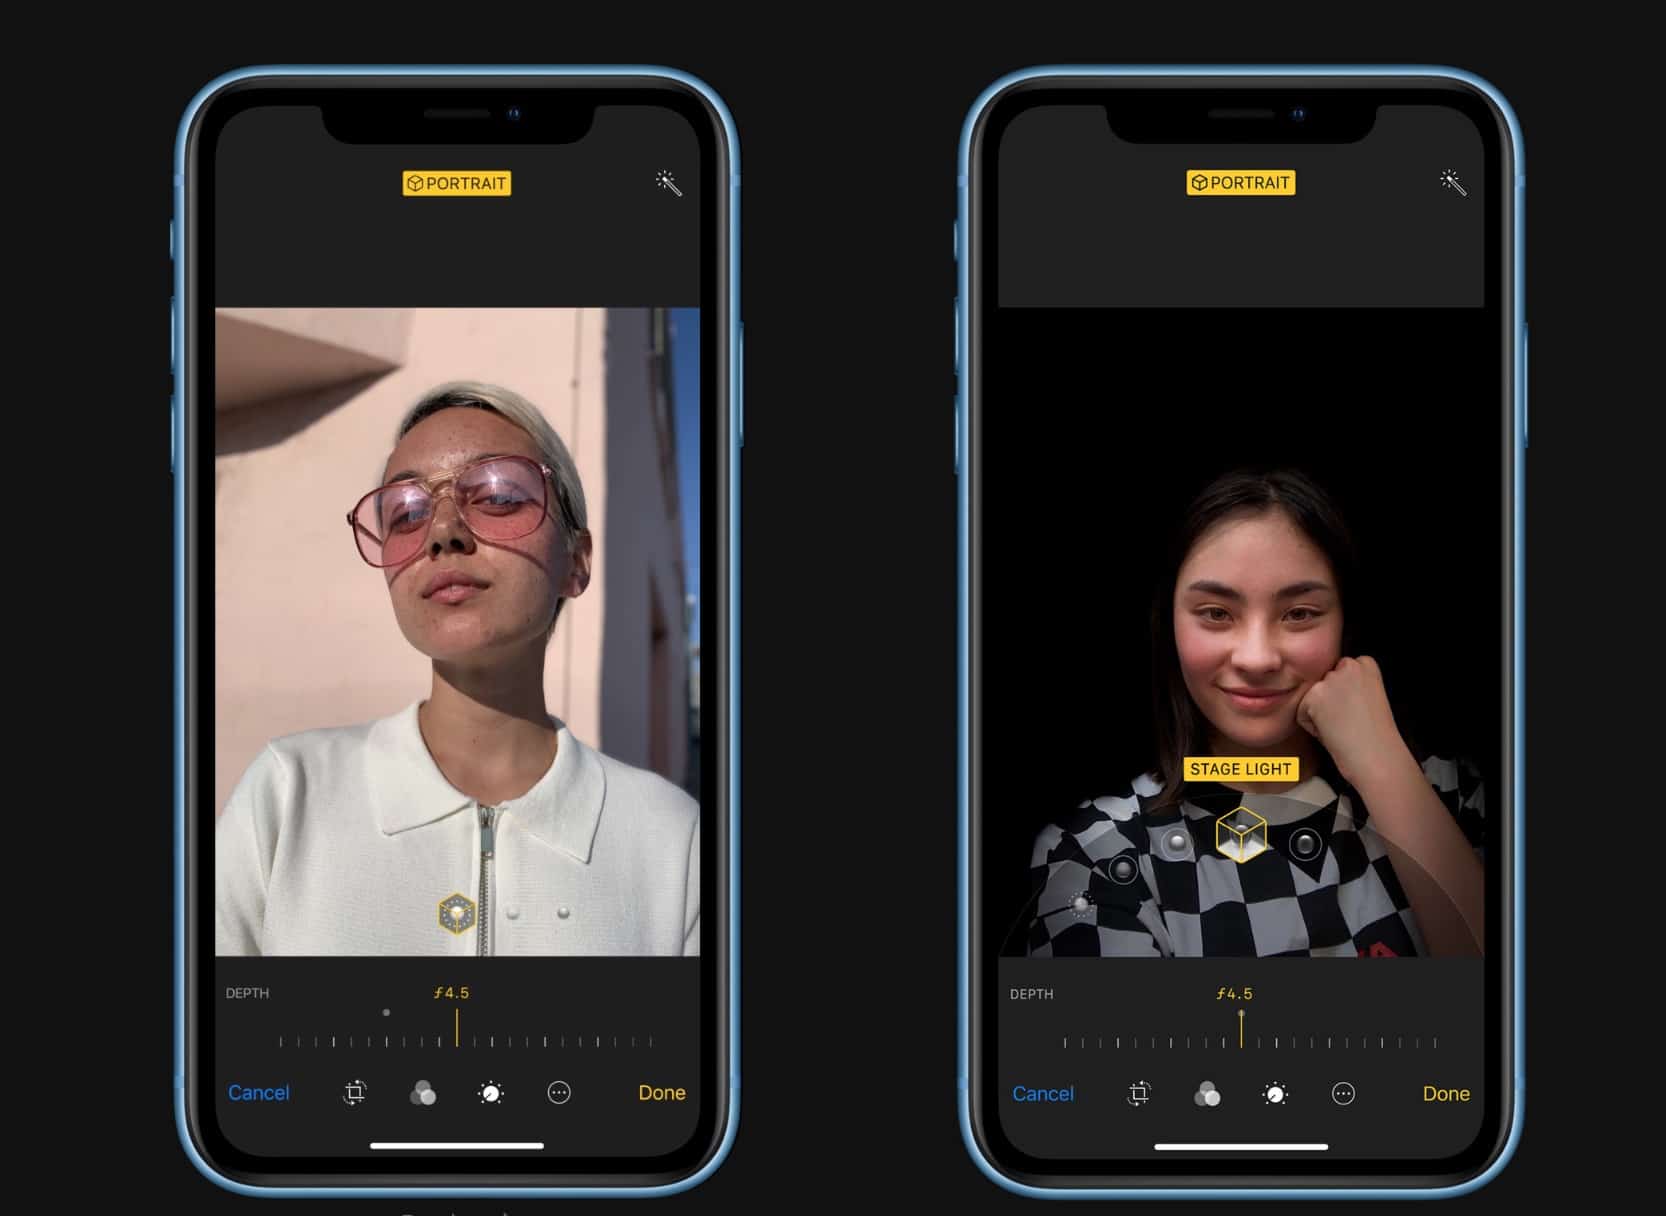 Iphone Xr Portrait Mode Has One Serious, Does Iphone Xr Have Landscape Mode